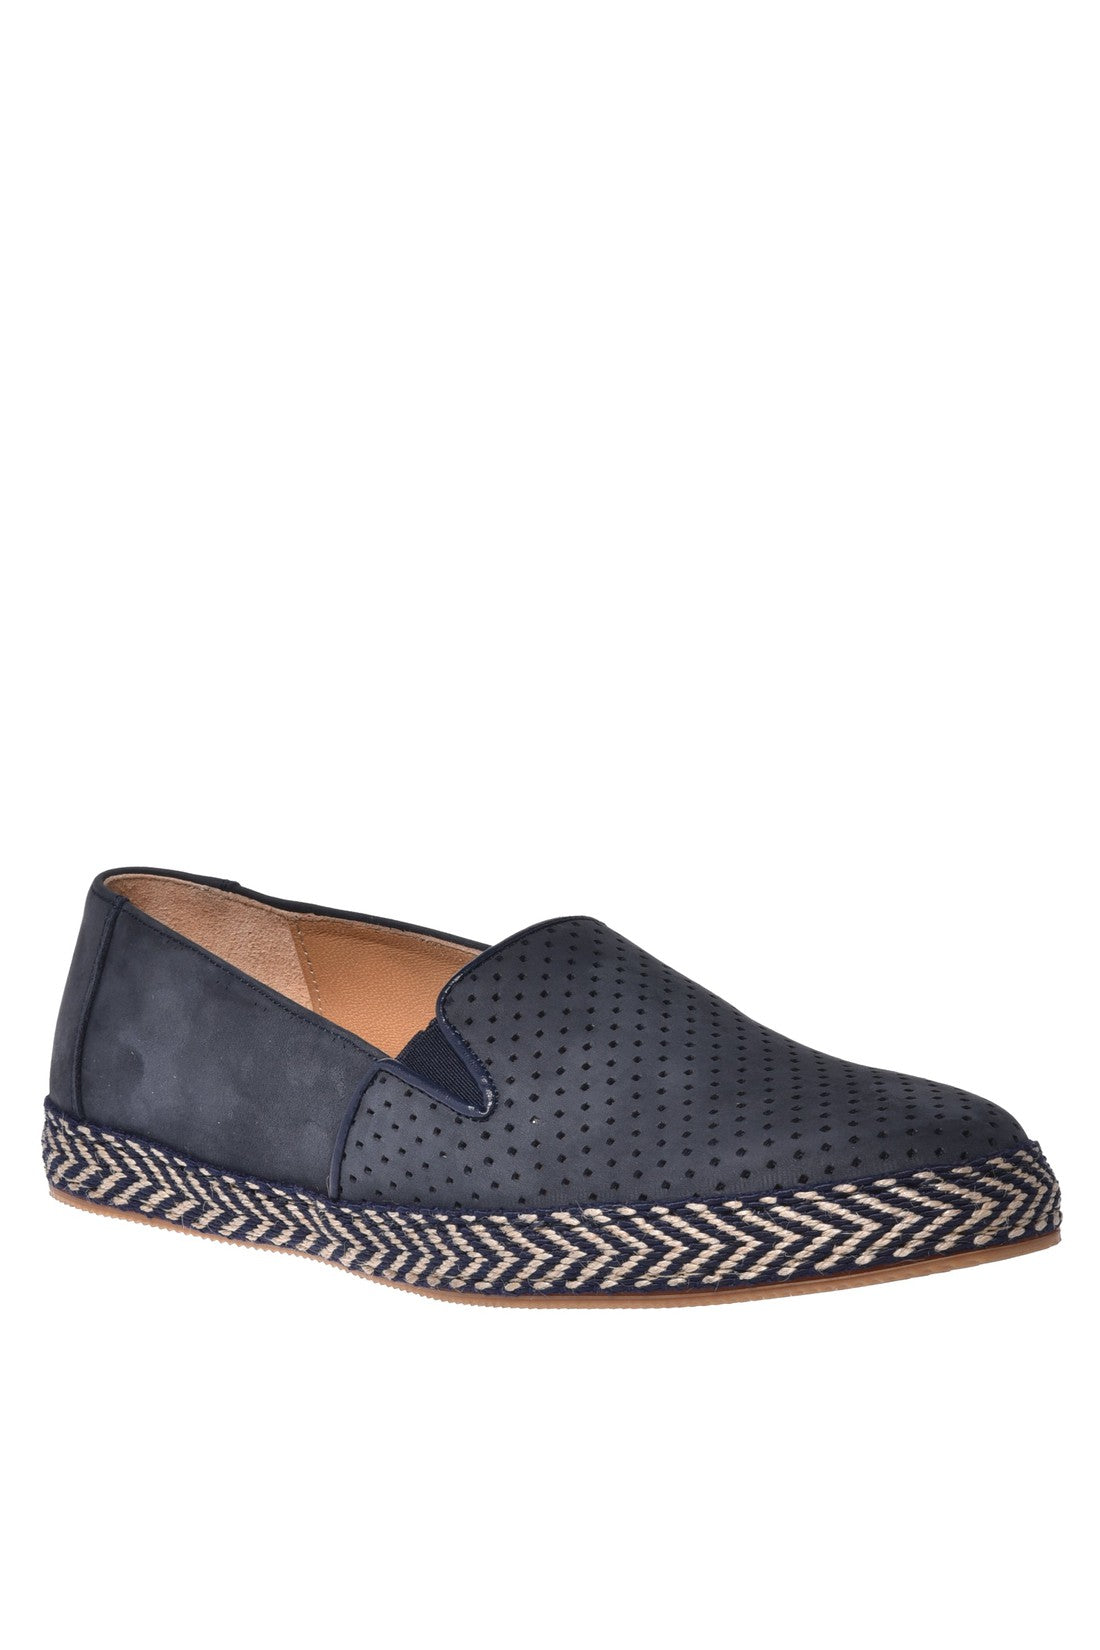 Espadrilles in taupe perforated suede